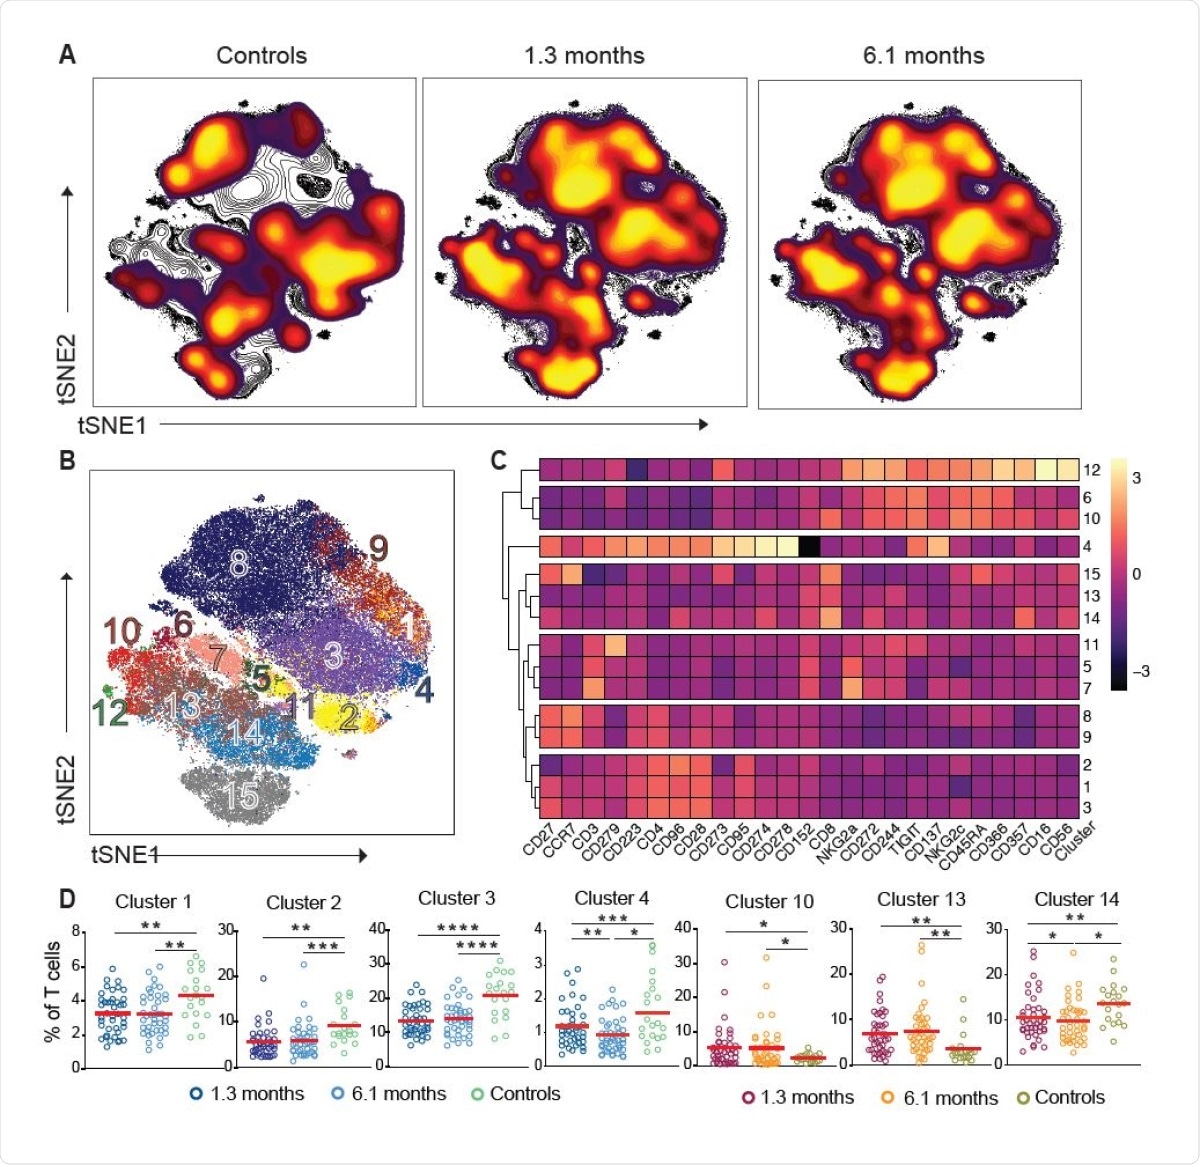 Persistent longitudinal changes in the phenotypic landscape of T cells in individuals recovered from COVID-19. (A) Global viSNE projection of pooled T cells for all participants pooled shown in background contour plots, with overlaid projections of concatenated controls, convalescent patients 1.3 months, and convalescent 6.1 months, respectively. (B) viSNE projection of pooled T cells for all participants of T cell clusters identified by FlowSOM clustering. (C) Column-scaled z-scores of median fluorescence intensity (MFI) as indicated by cluster and marker. (D) Frequency of T cells from each group in FlowSOM clusters indicated. Each dot represents an individual with COVID-19 at 1.3 months (dark blue for CD4+ T cells and dark red for CD8+ T cells) or 6.1 months (light blue for CD4+ T cells and orange for CD8+ T cells) as well as control individuals (green).